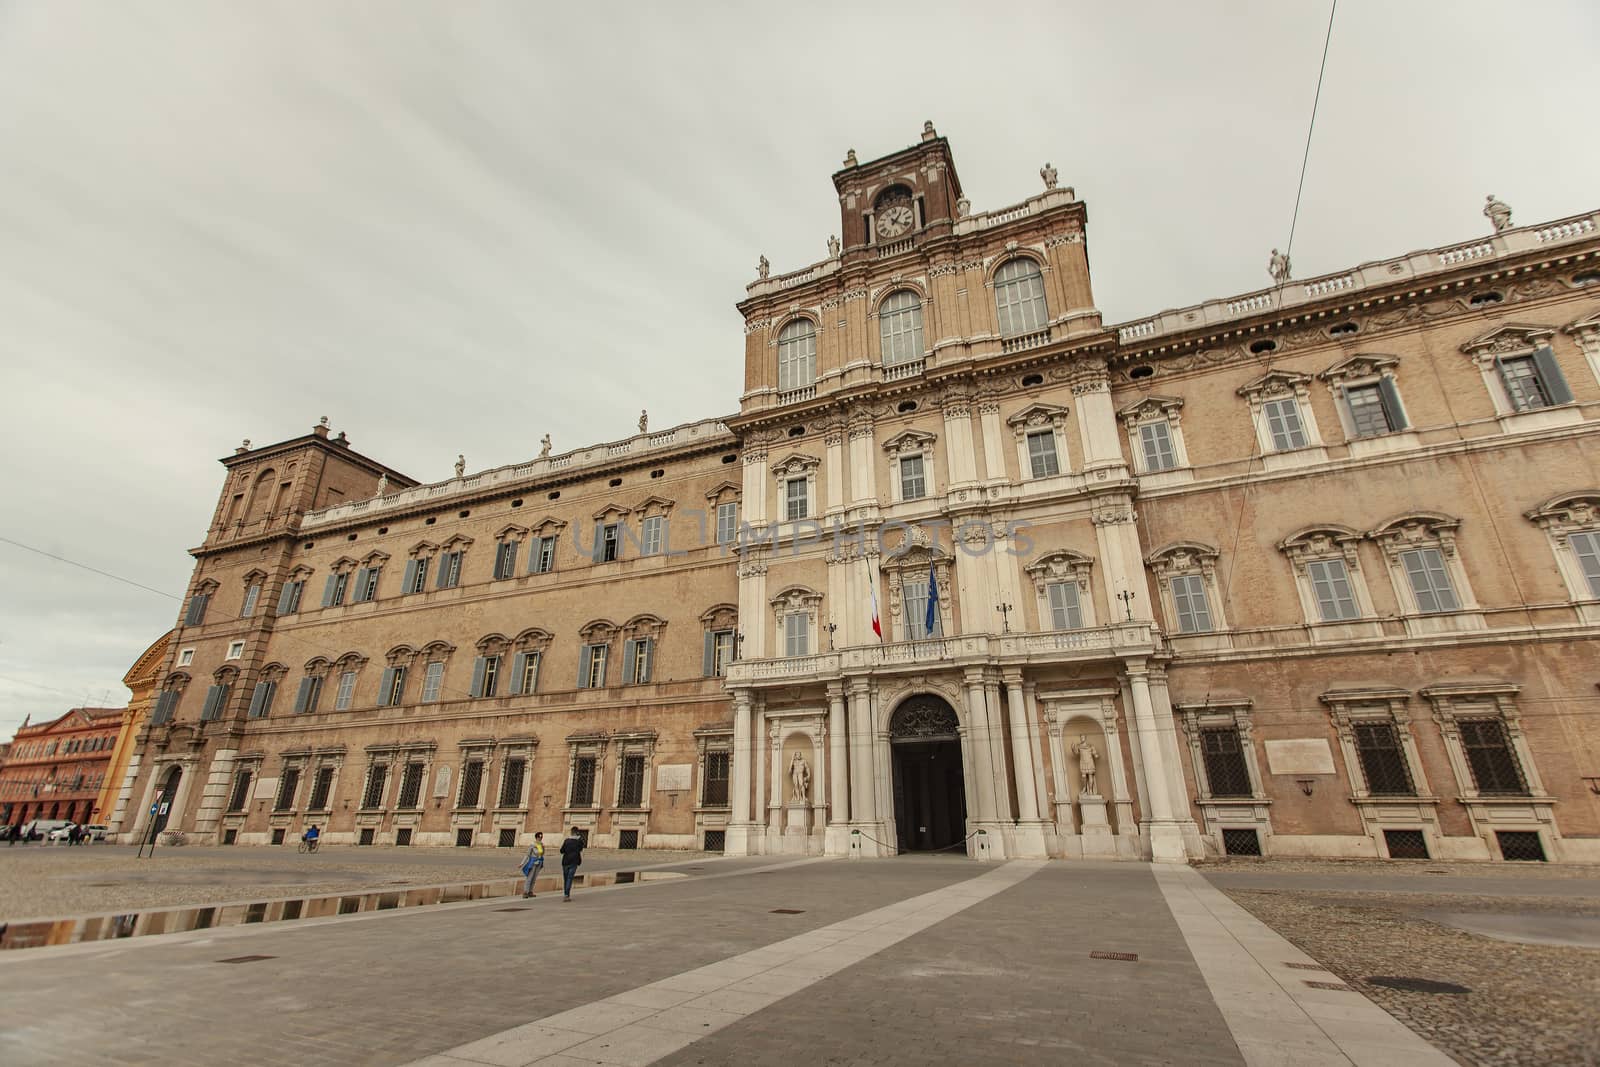 Palazzo Ducale in Modena, Italy. In eglish Ducal palace in Modena, the historic italian city.